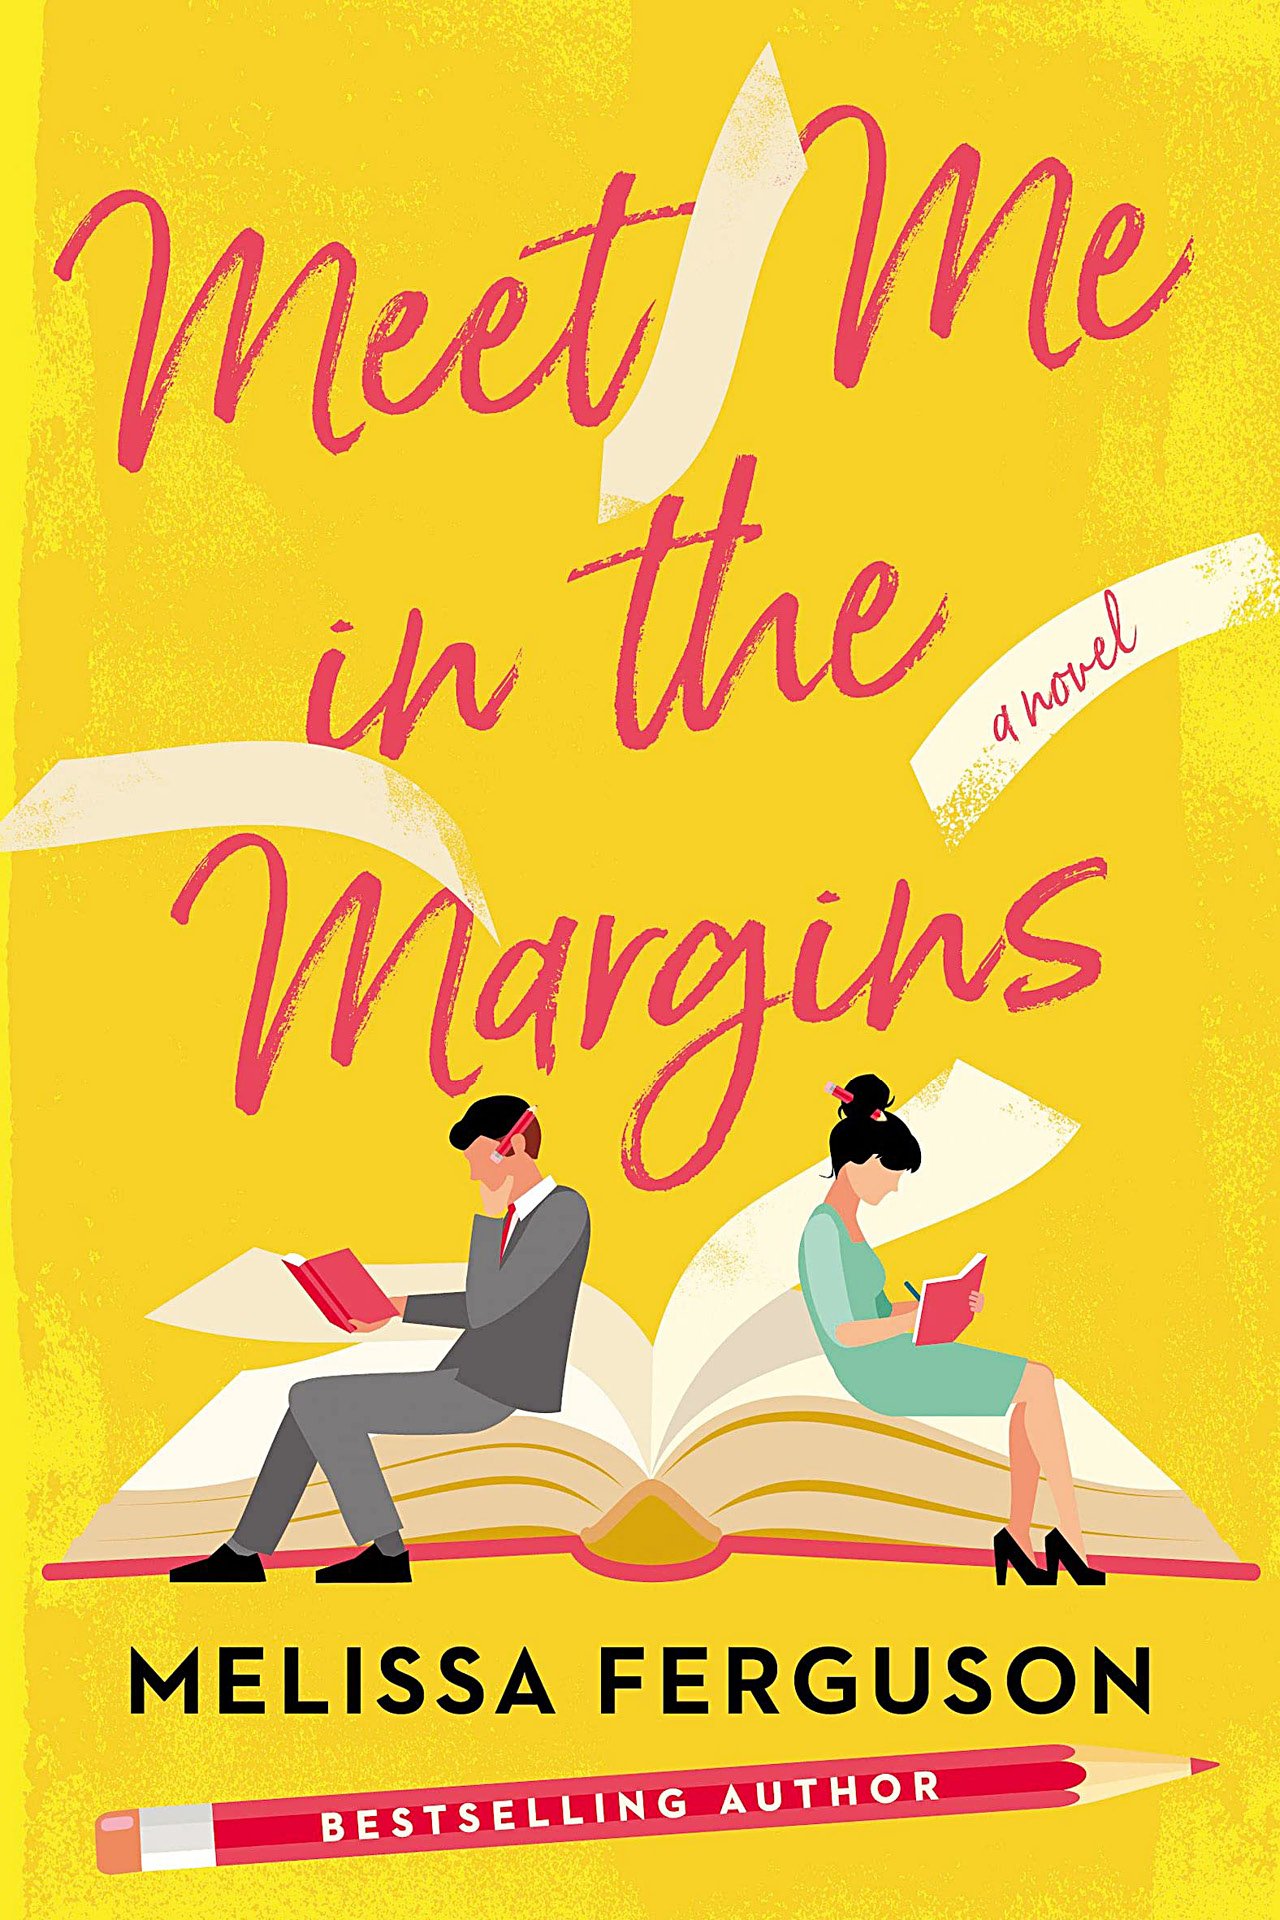 The cover of Meet Me in the Margins by Melissa Ferguson